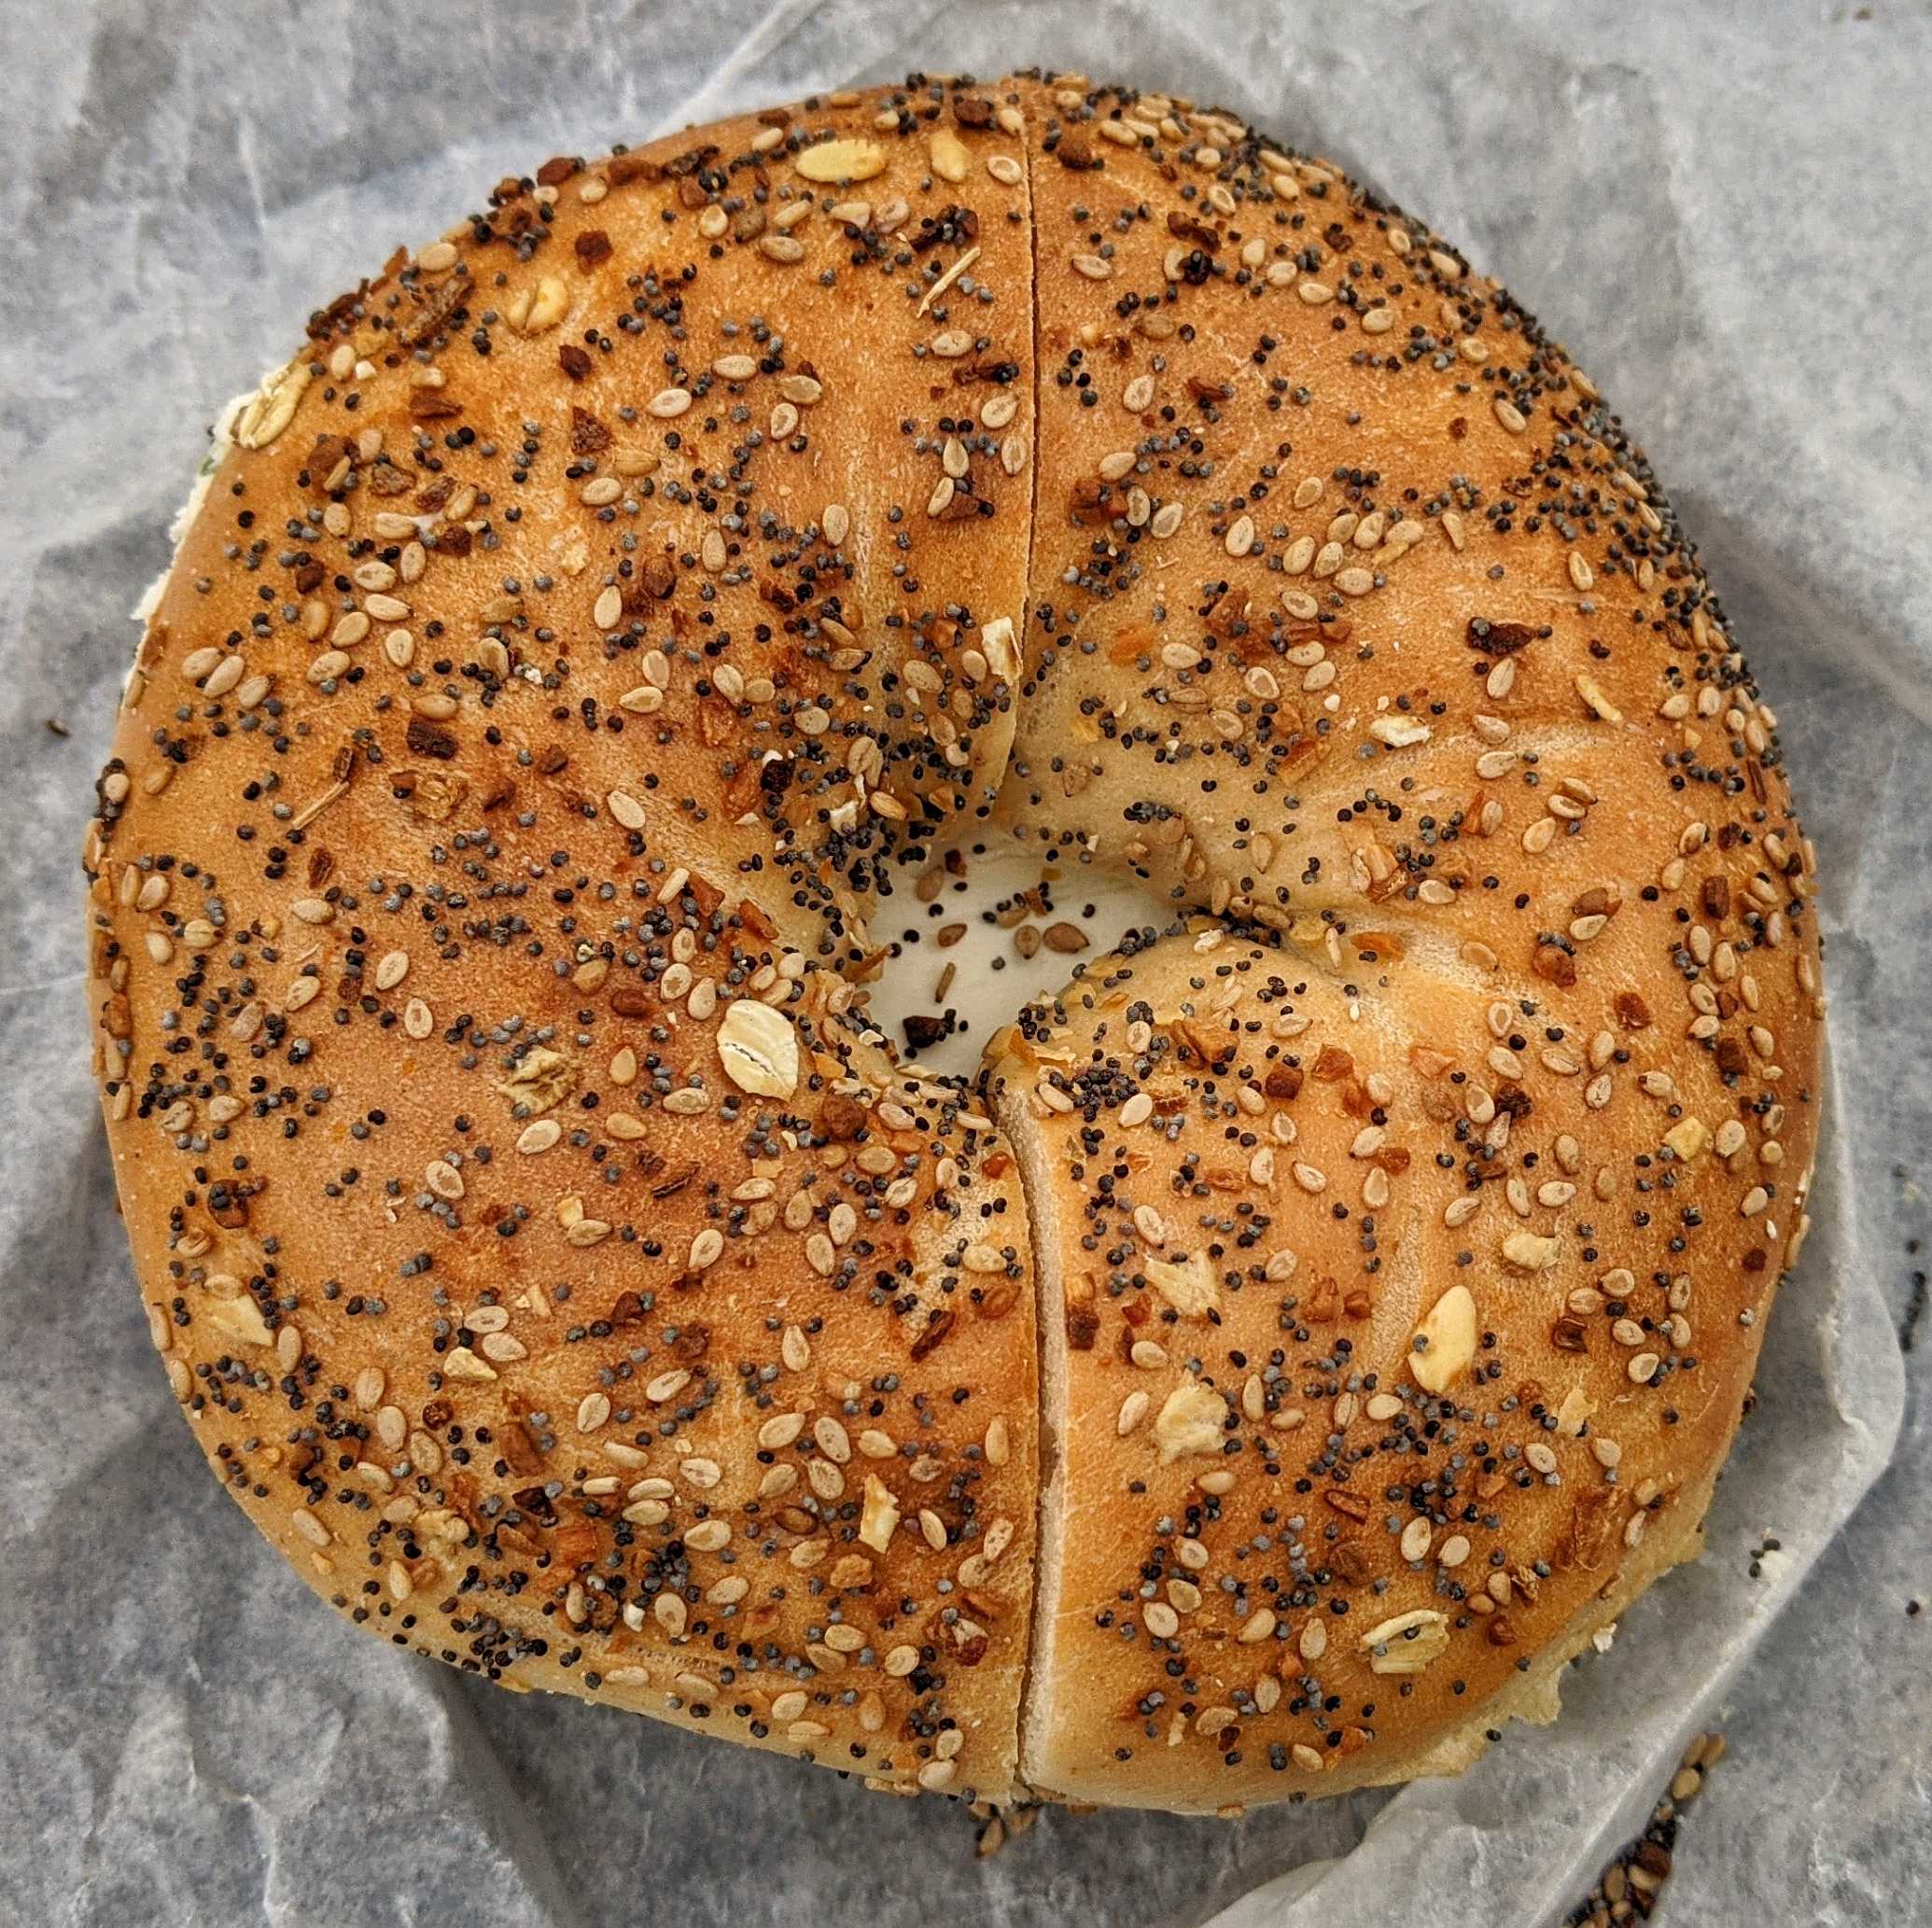 The Brothers Bagels